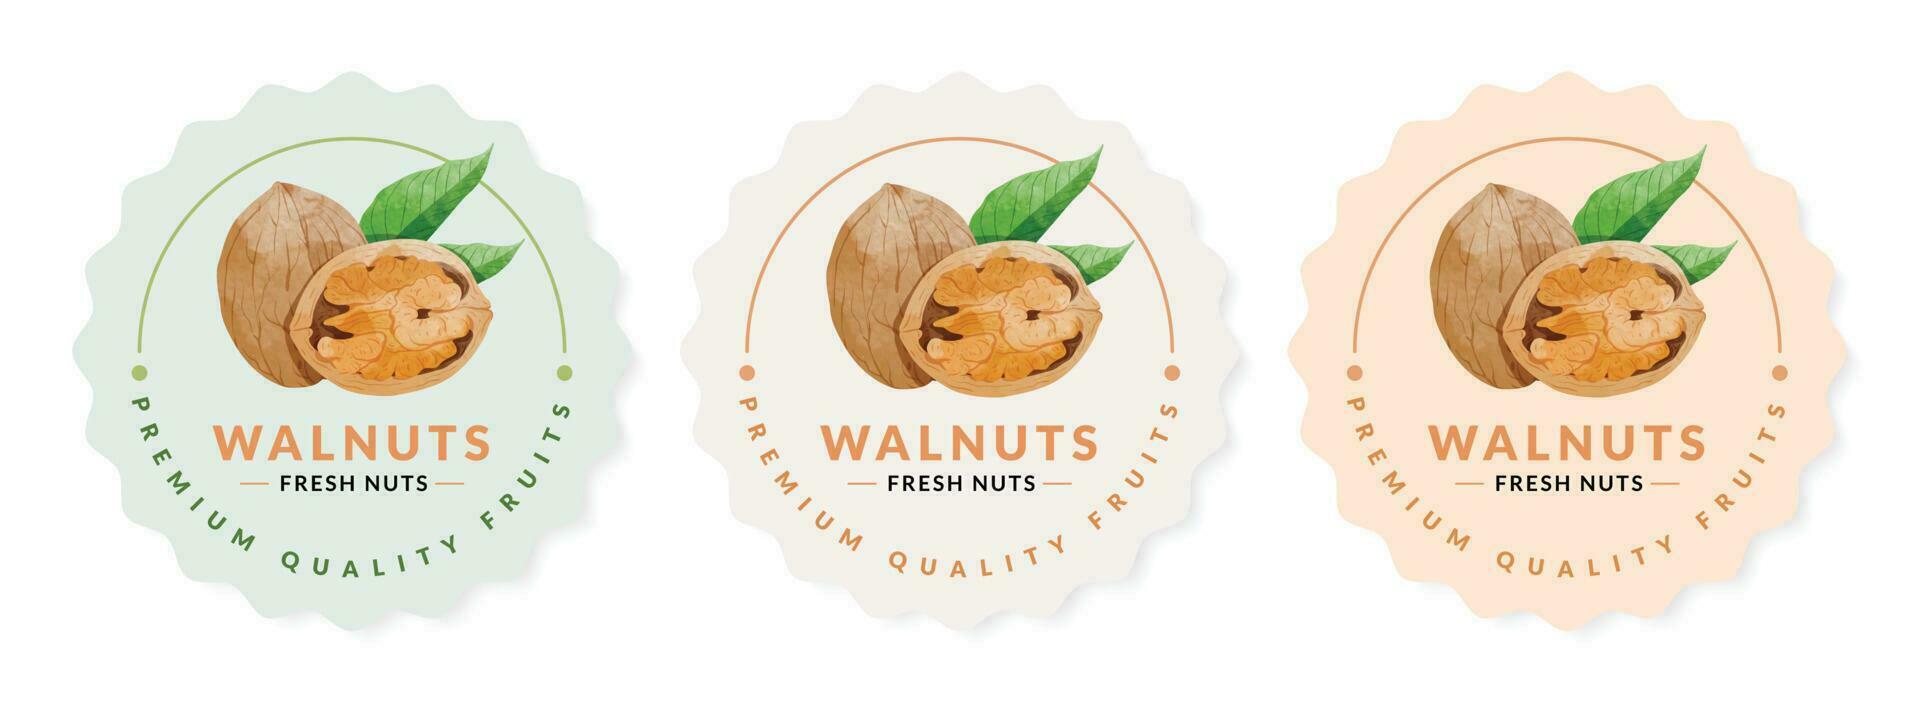 Walnut packaging design templates, watercolour style vector illustration.